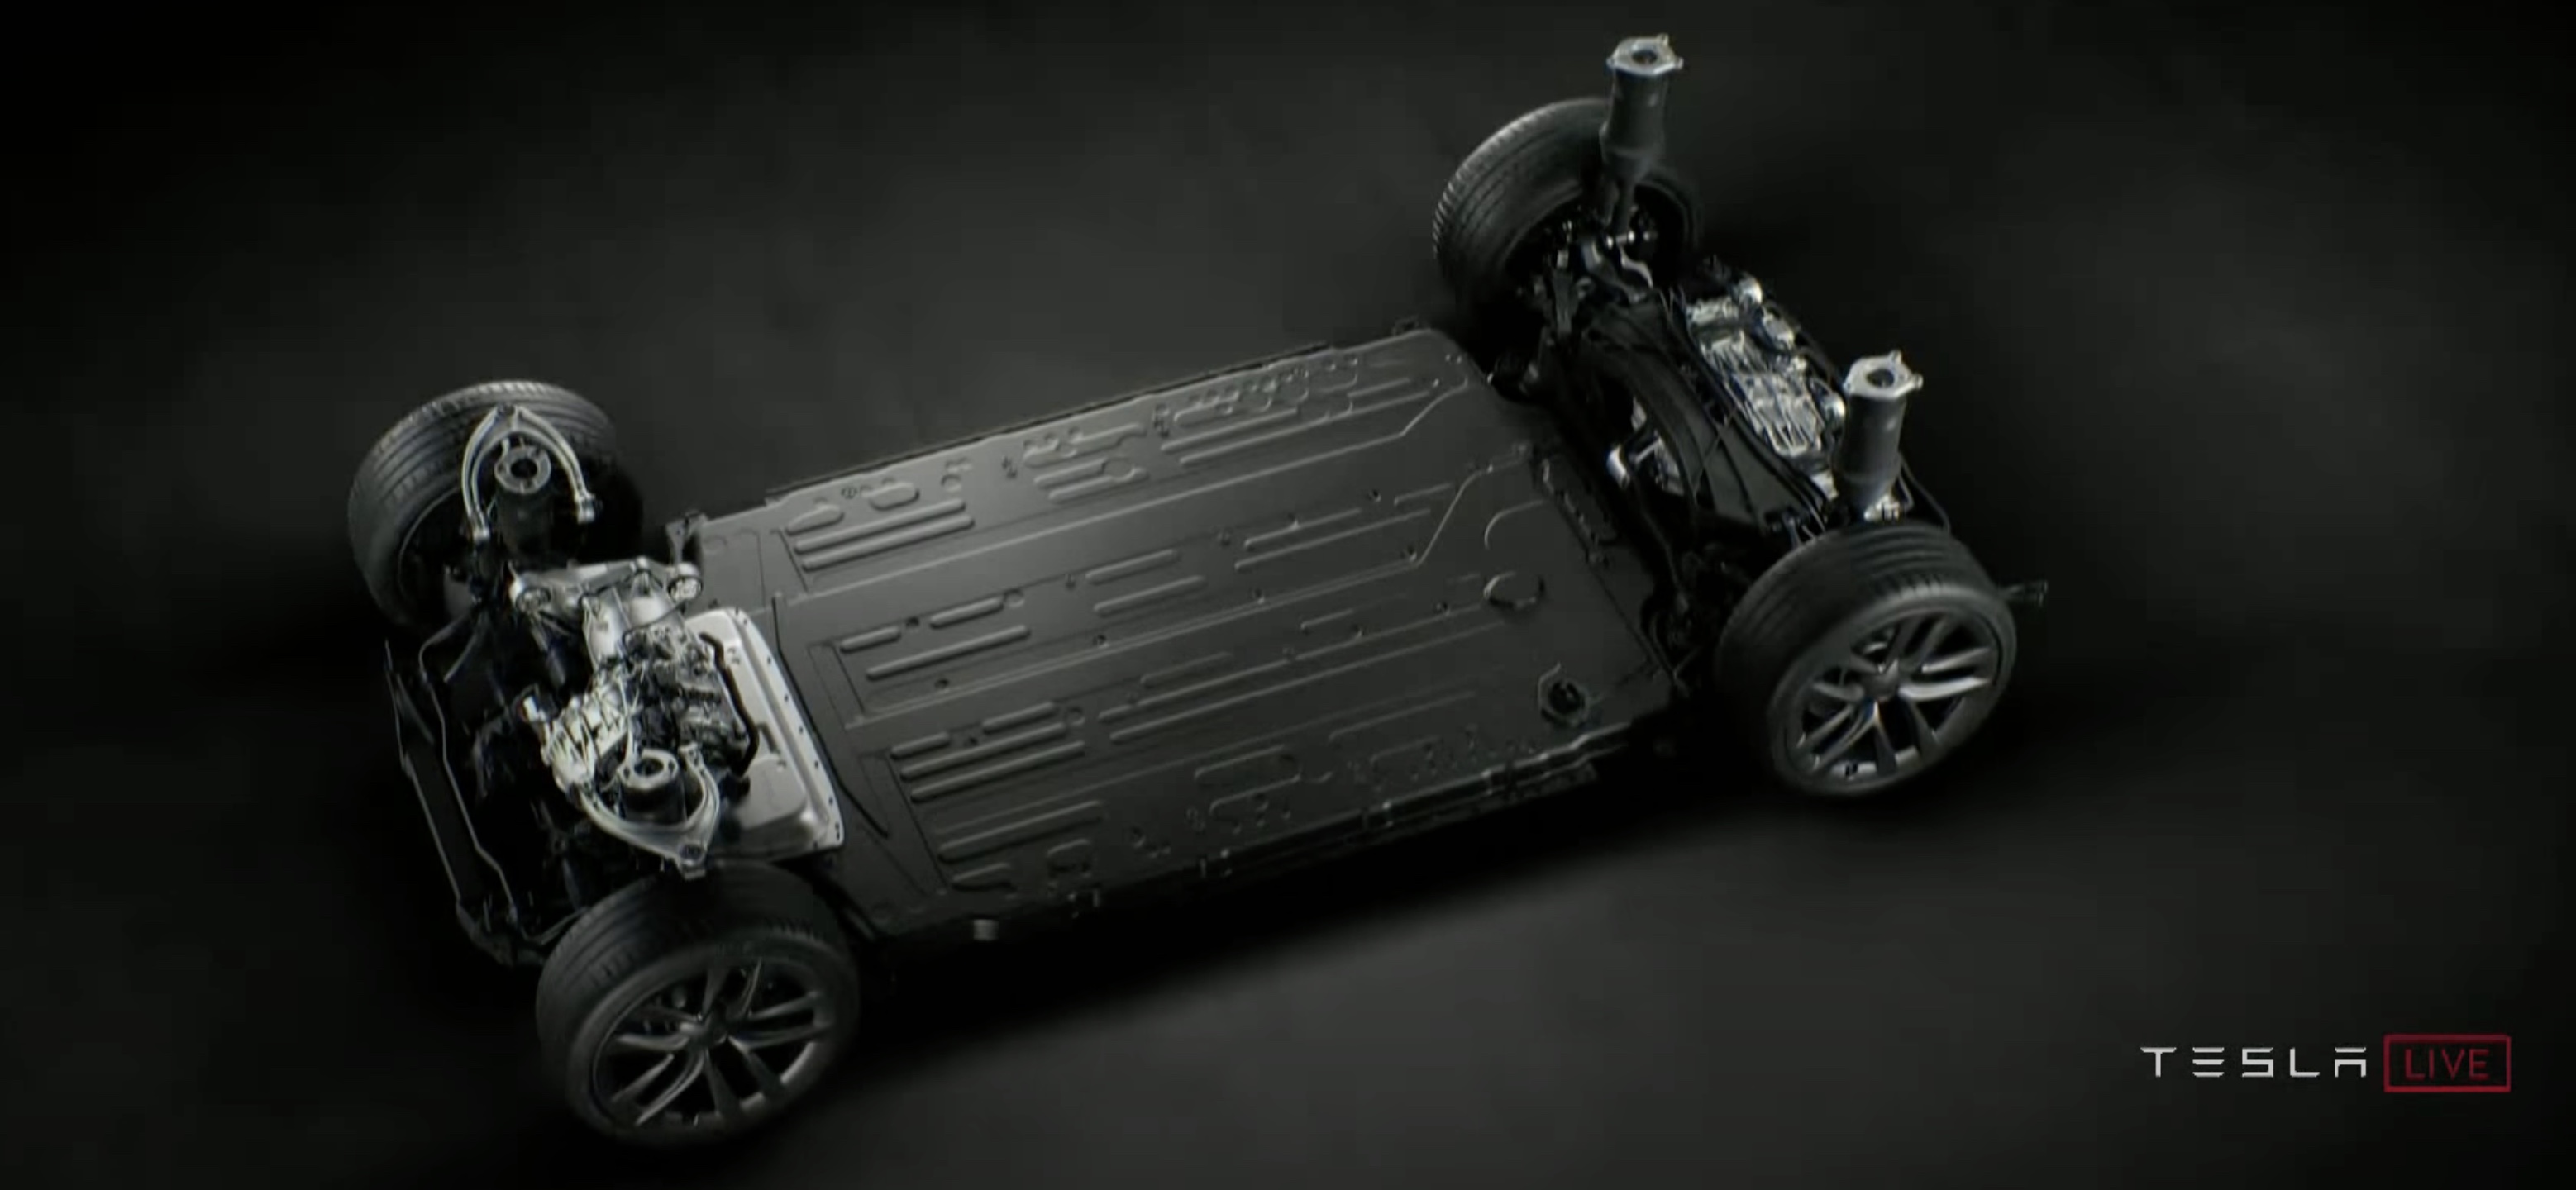 afdeling stimulere uberørt Tesla has reduced the energy capacity of the battery pack in the new Model S  | Electrek